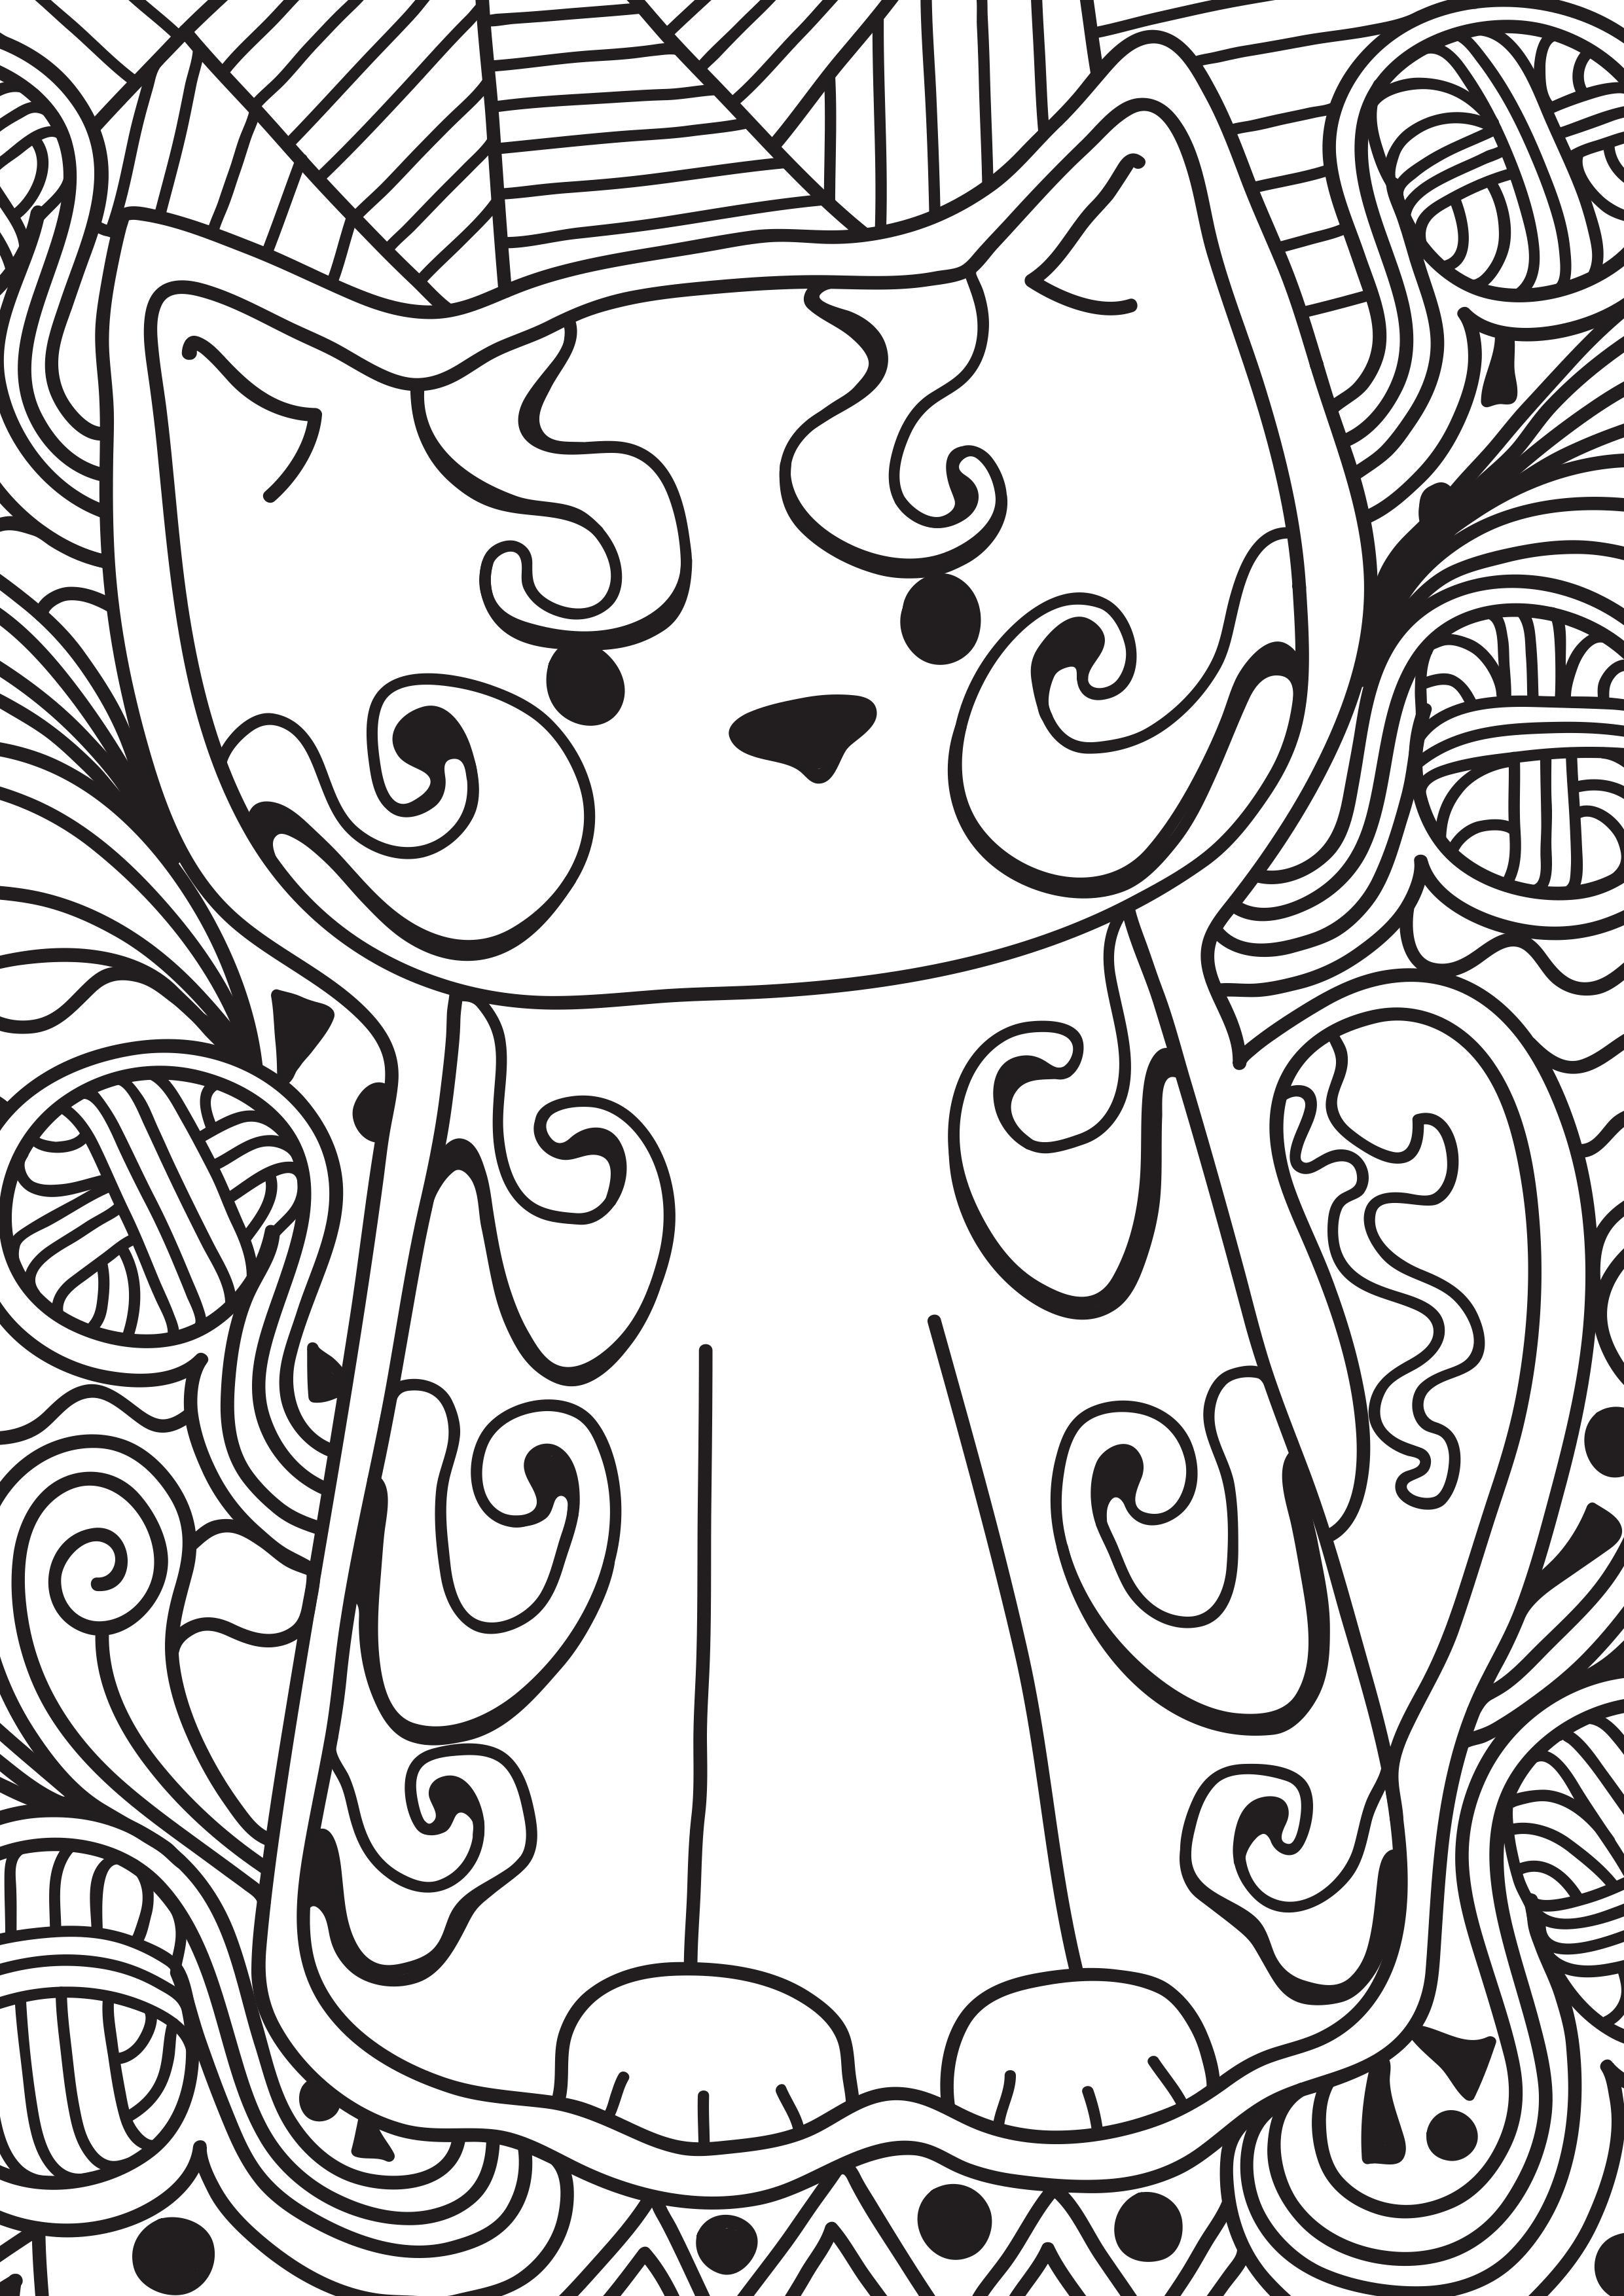 Coloring page little cat